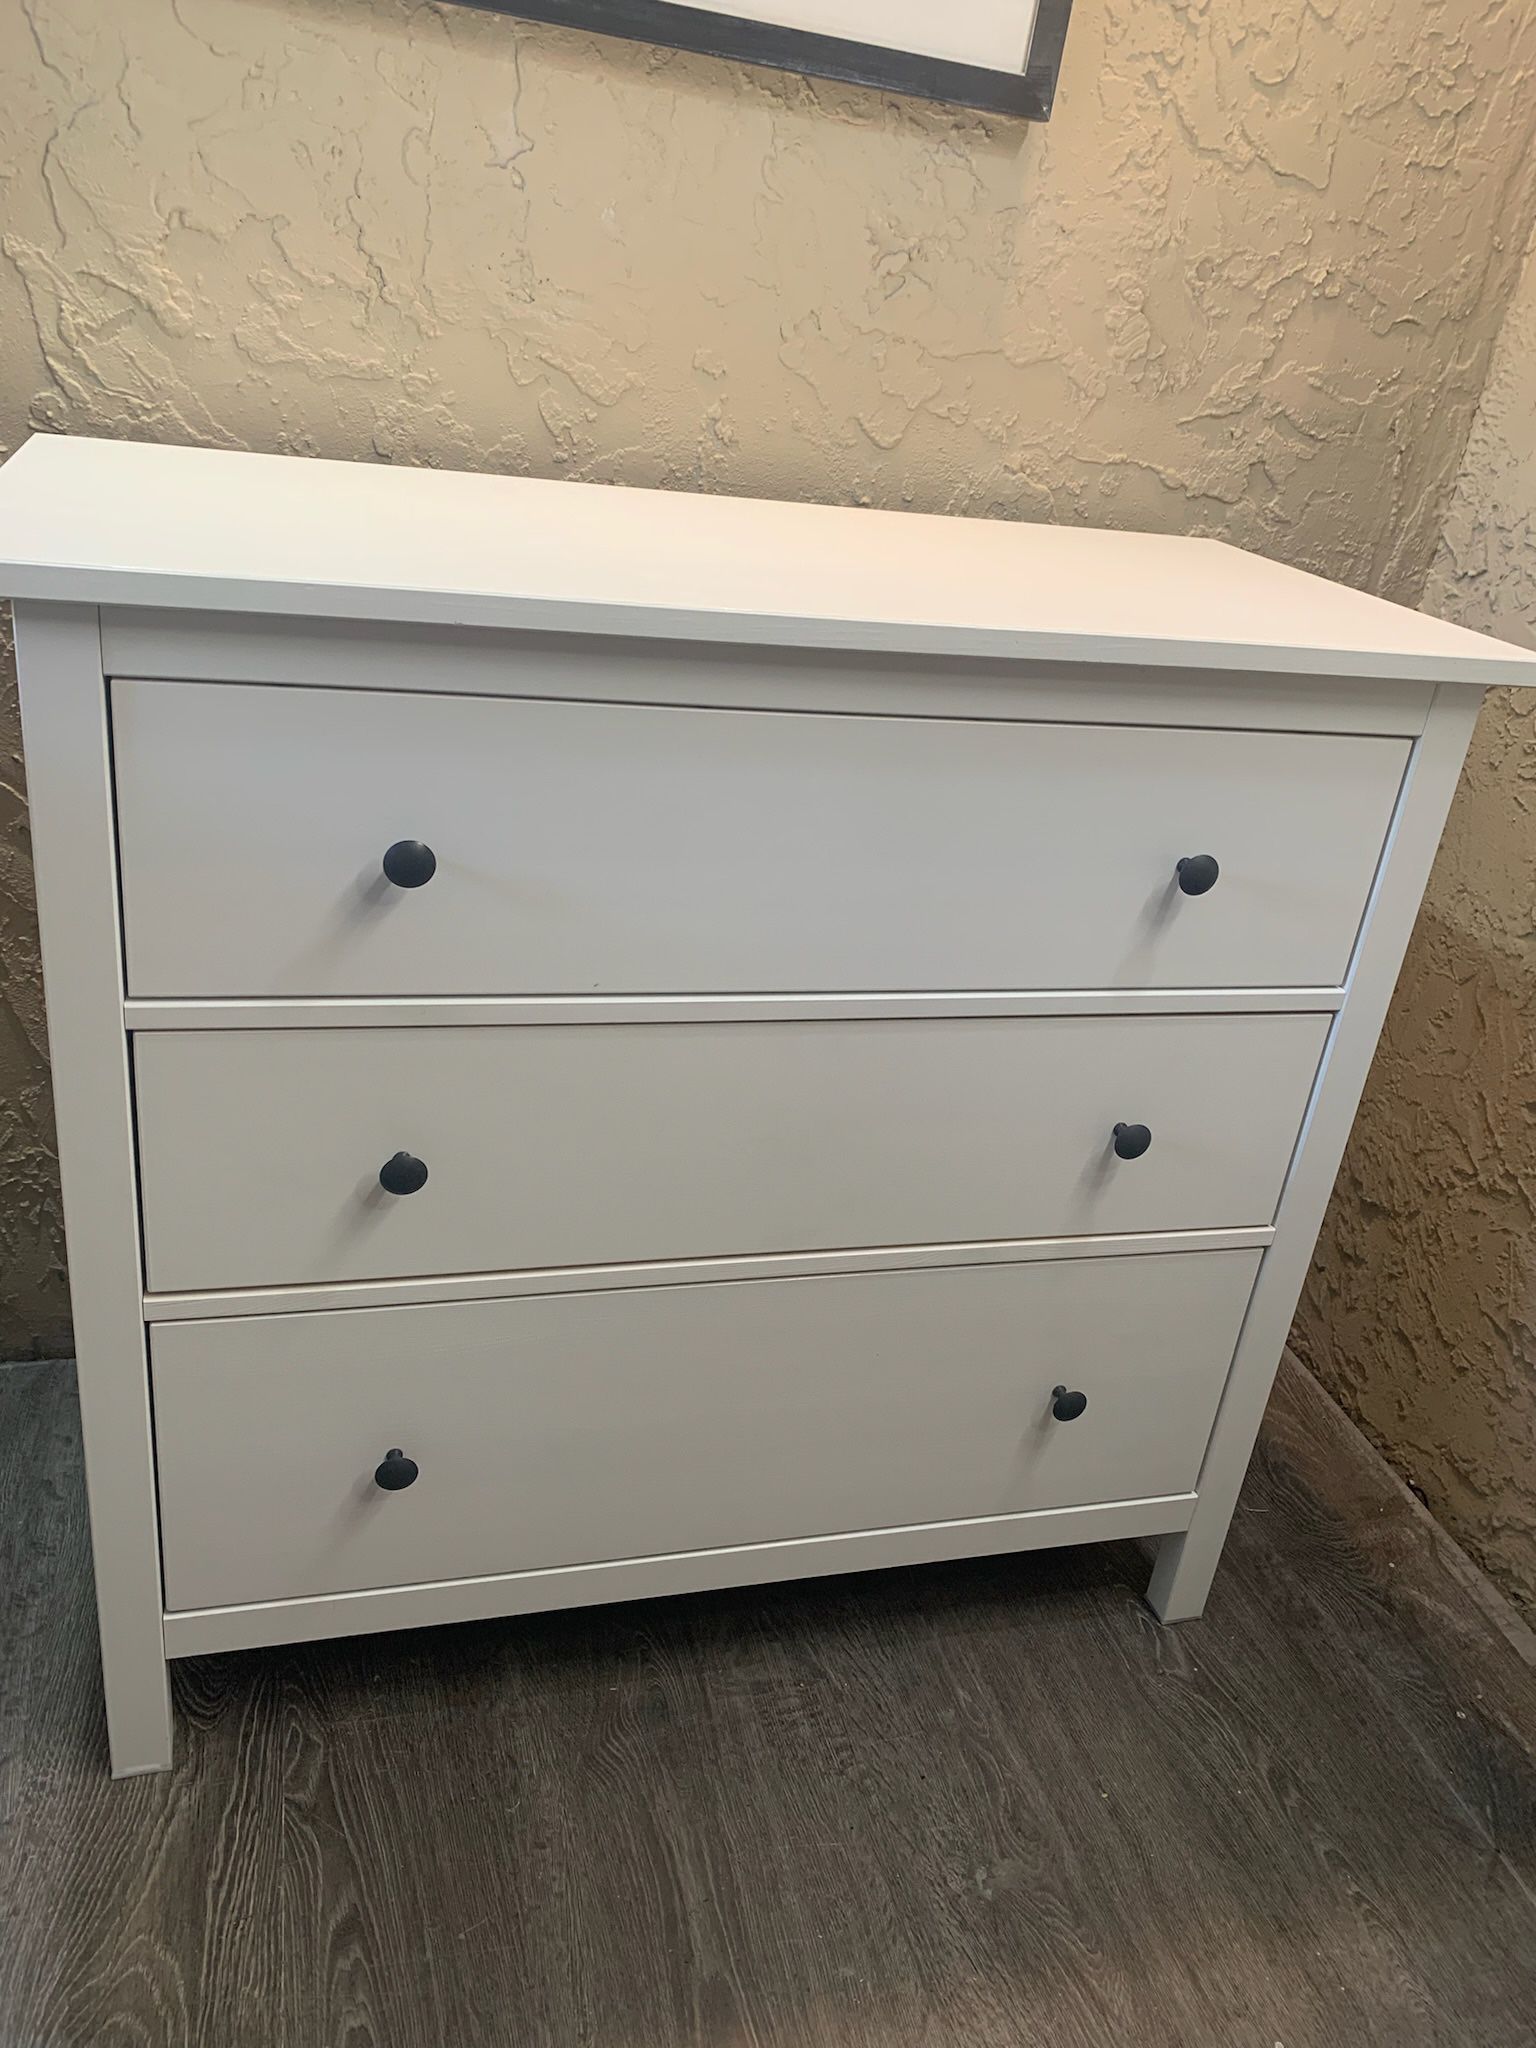 Ikea HEMNES  Solid Wood 3 drawer Dresser - Delivery Available For A Fee -See my other items 😄